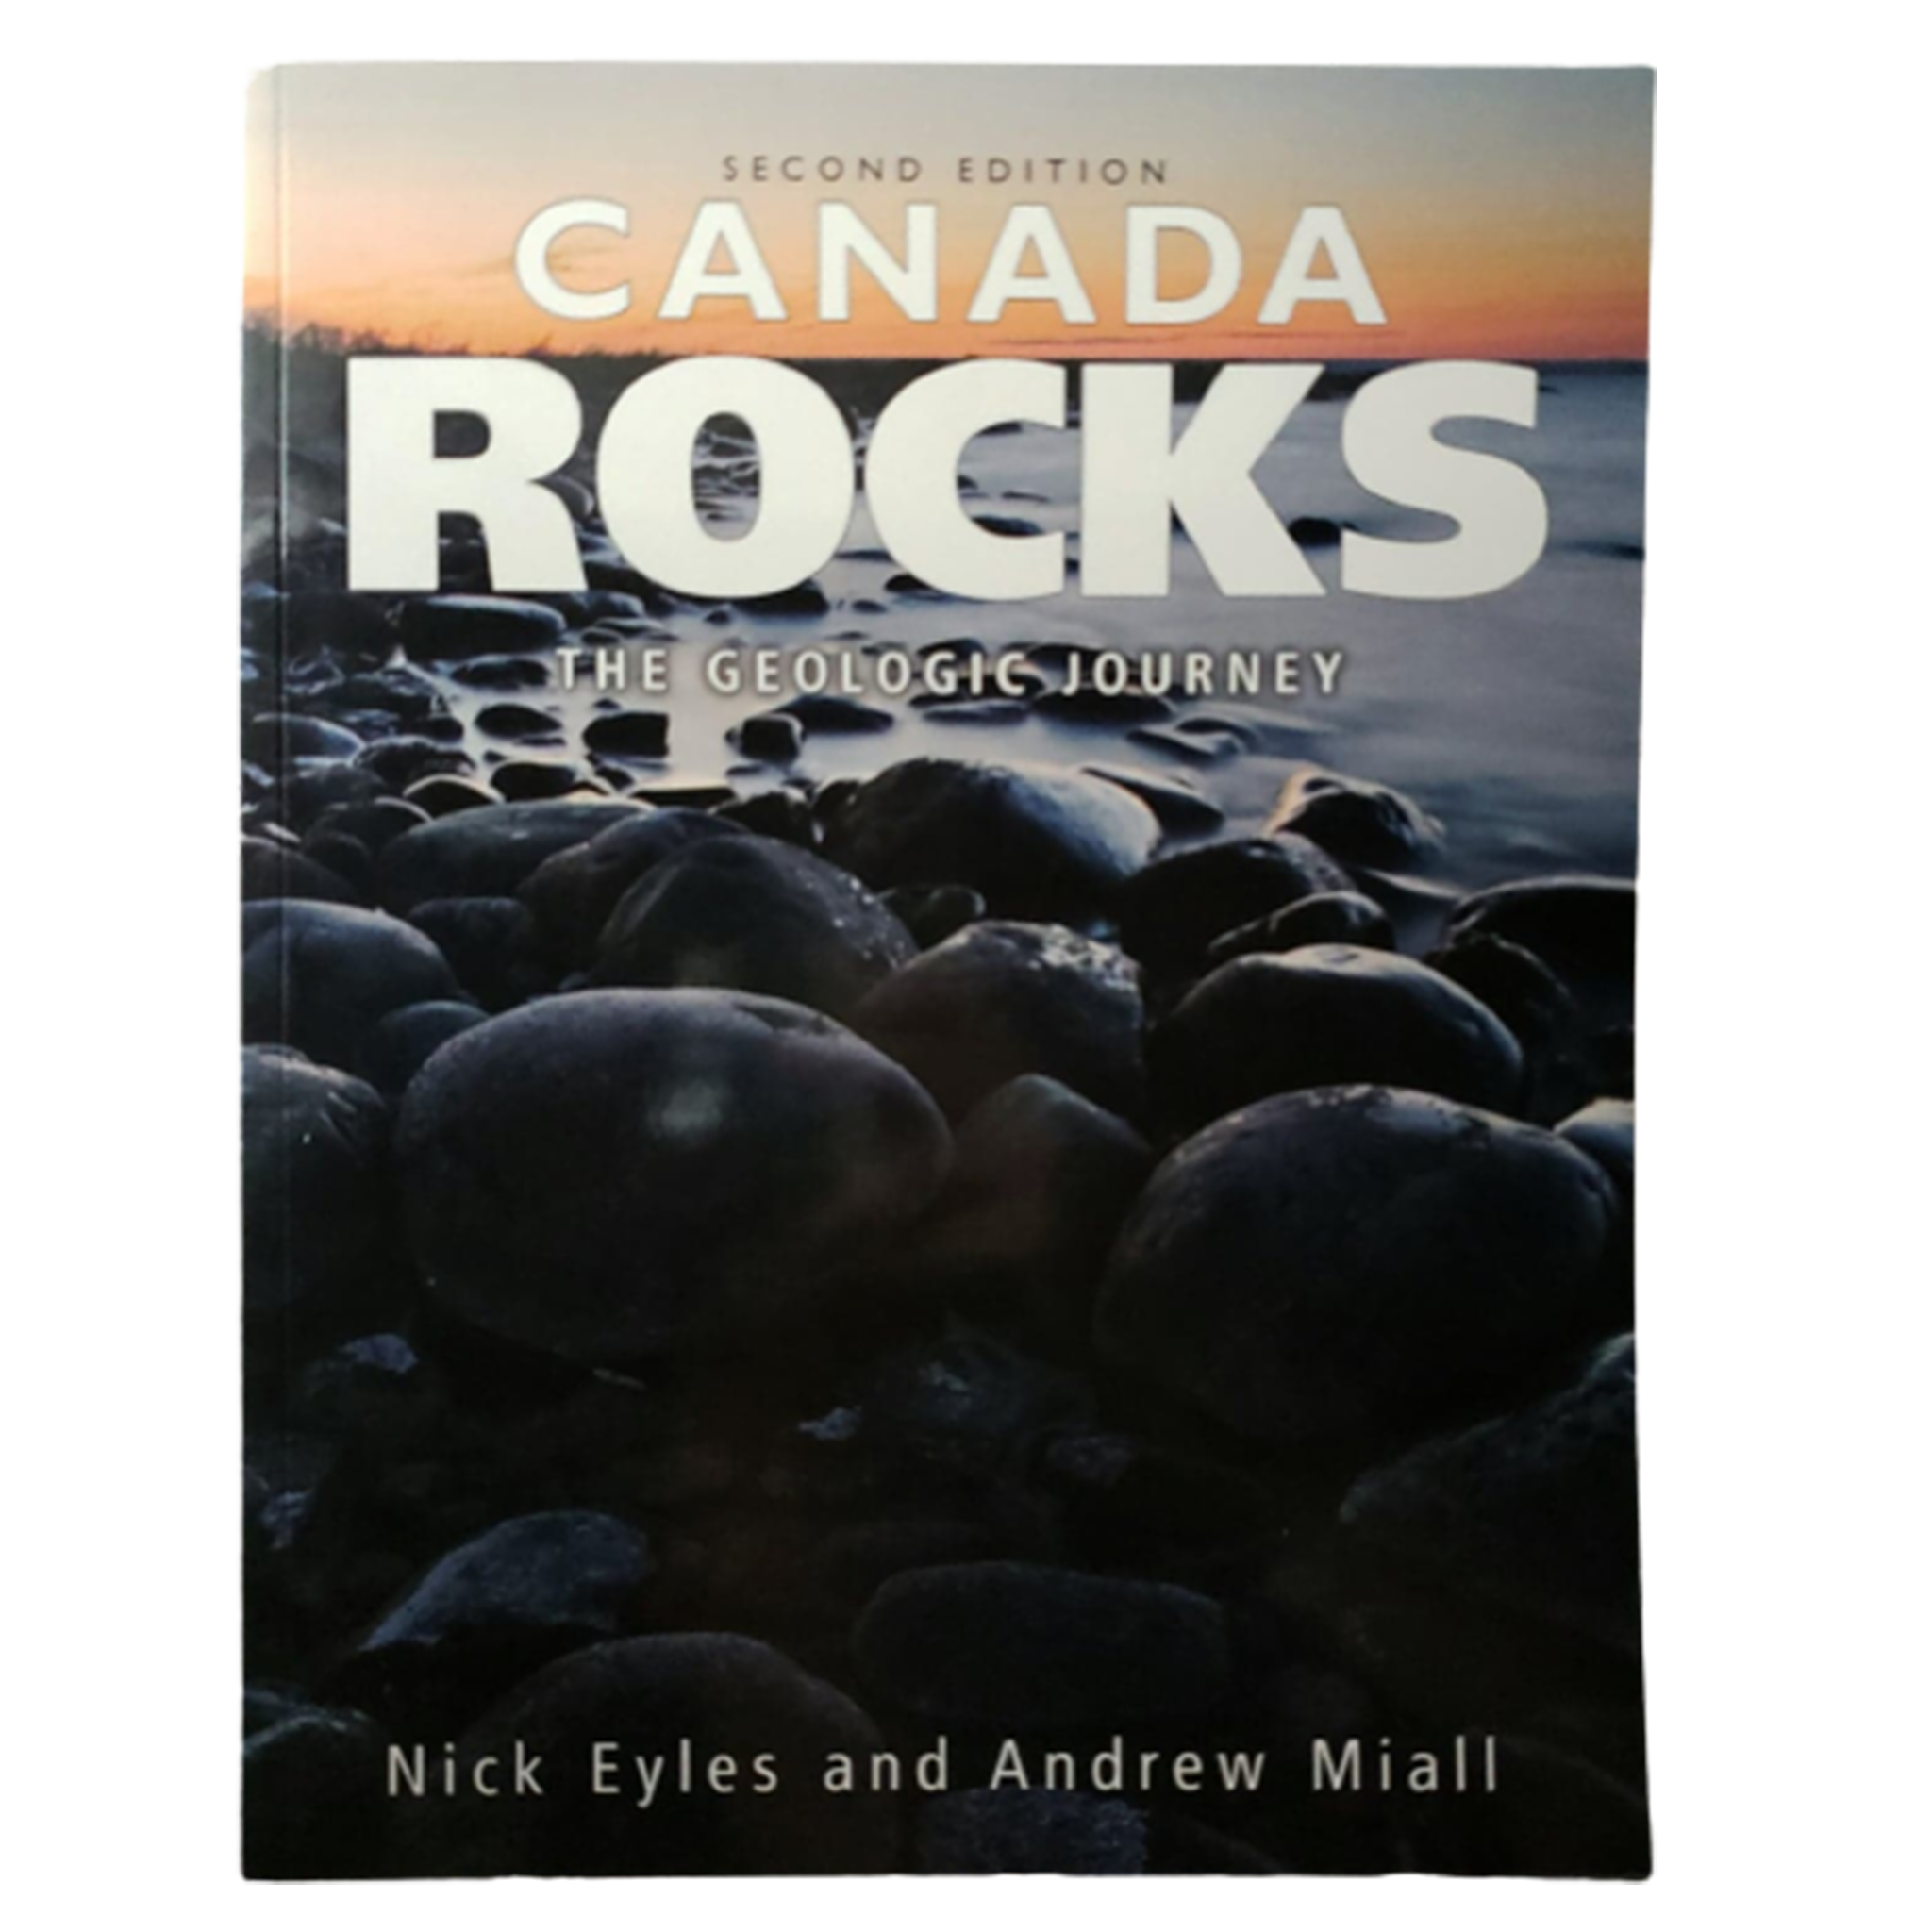 Canada Rocks: The Geological Journey Second Edition